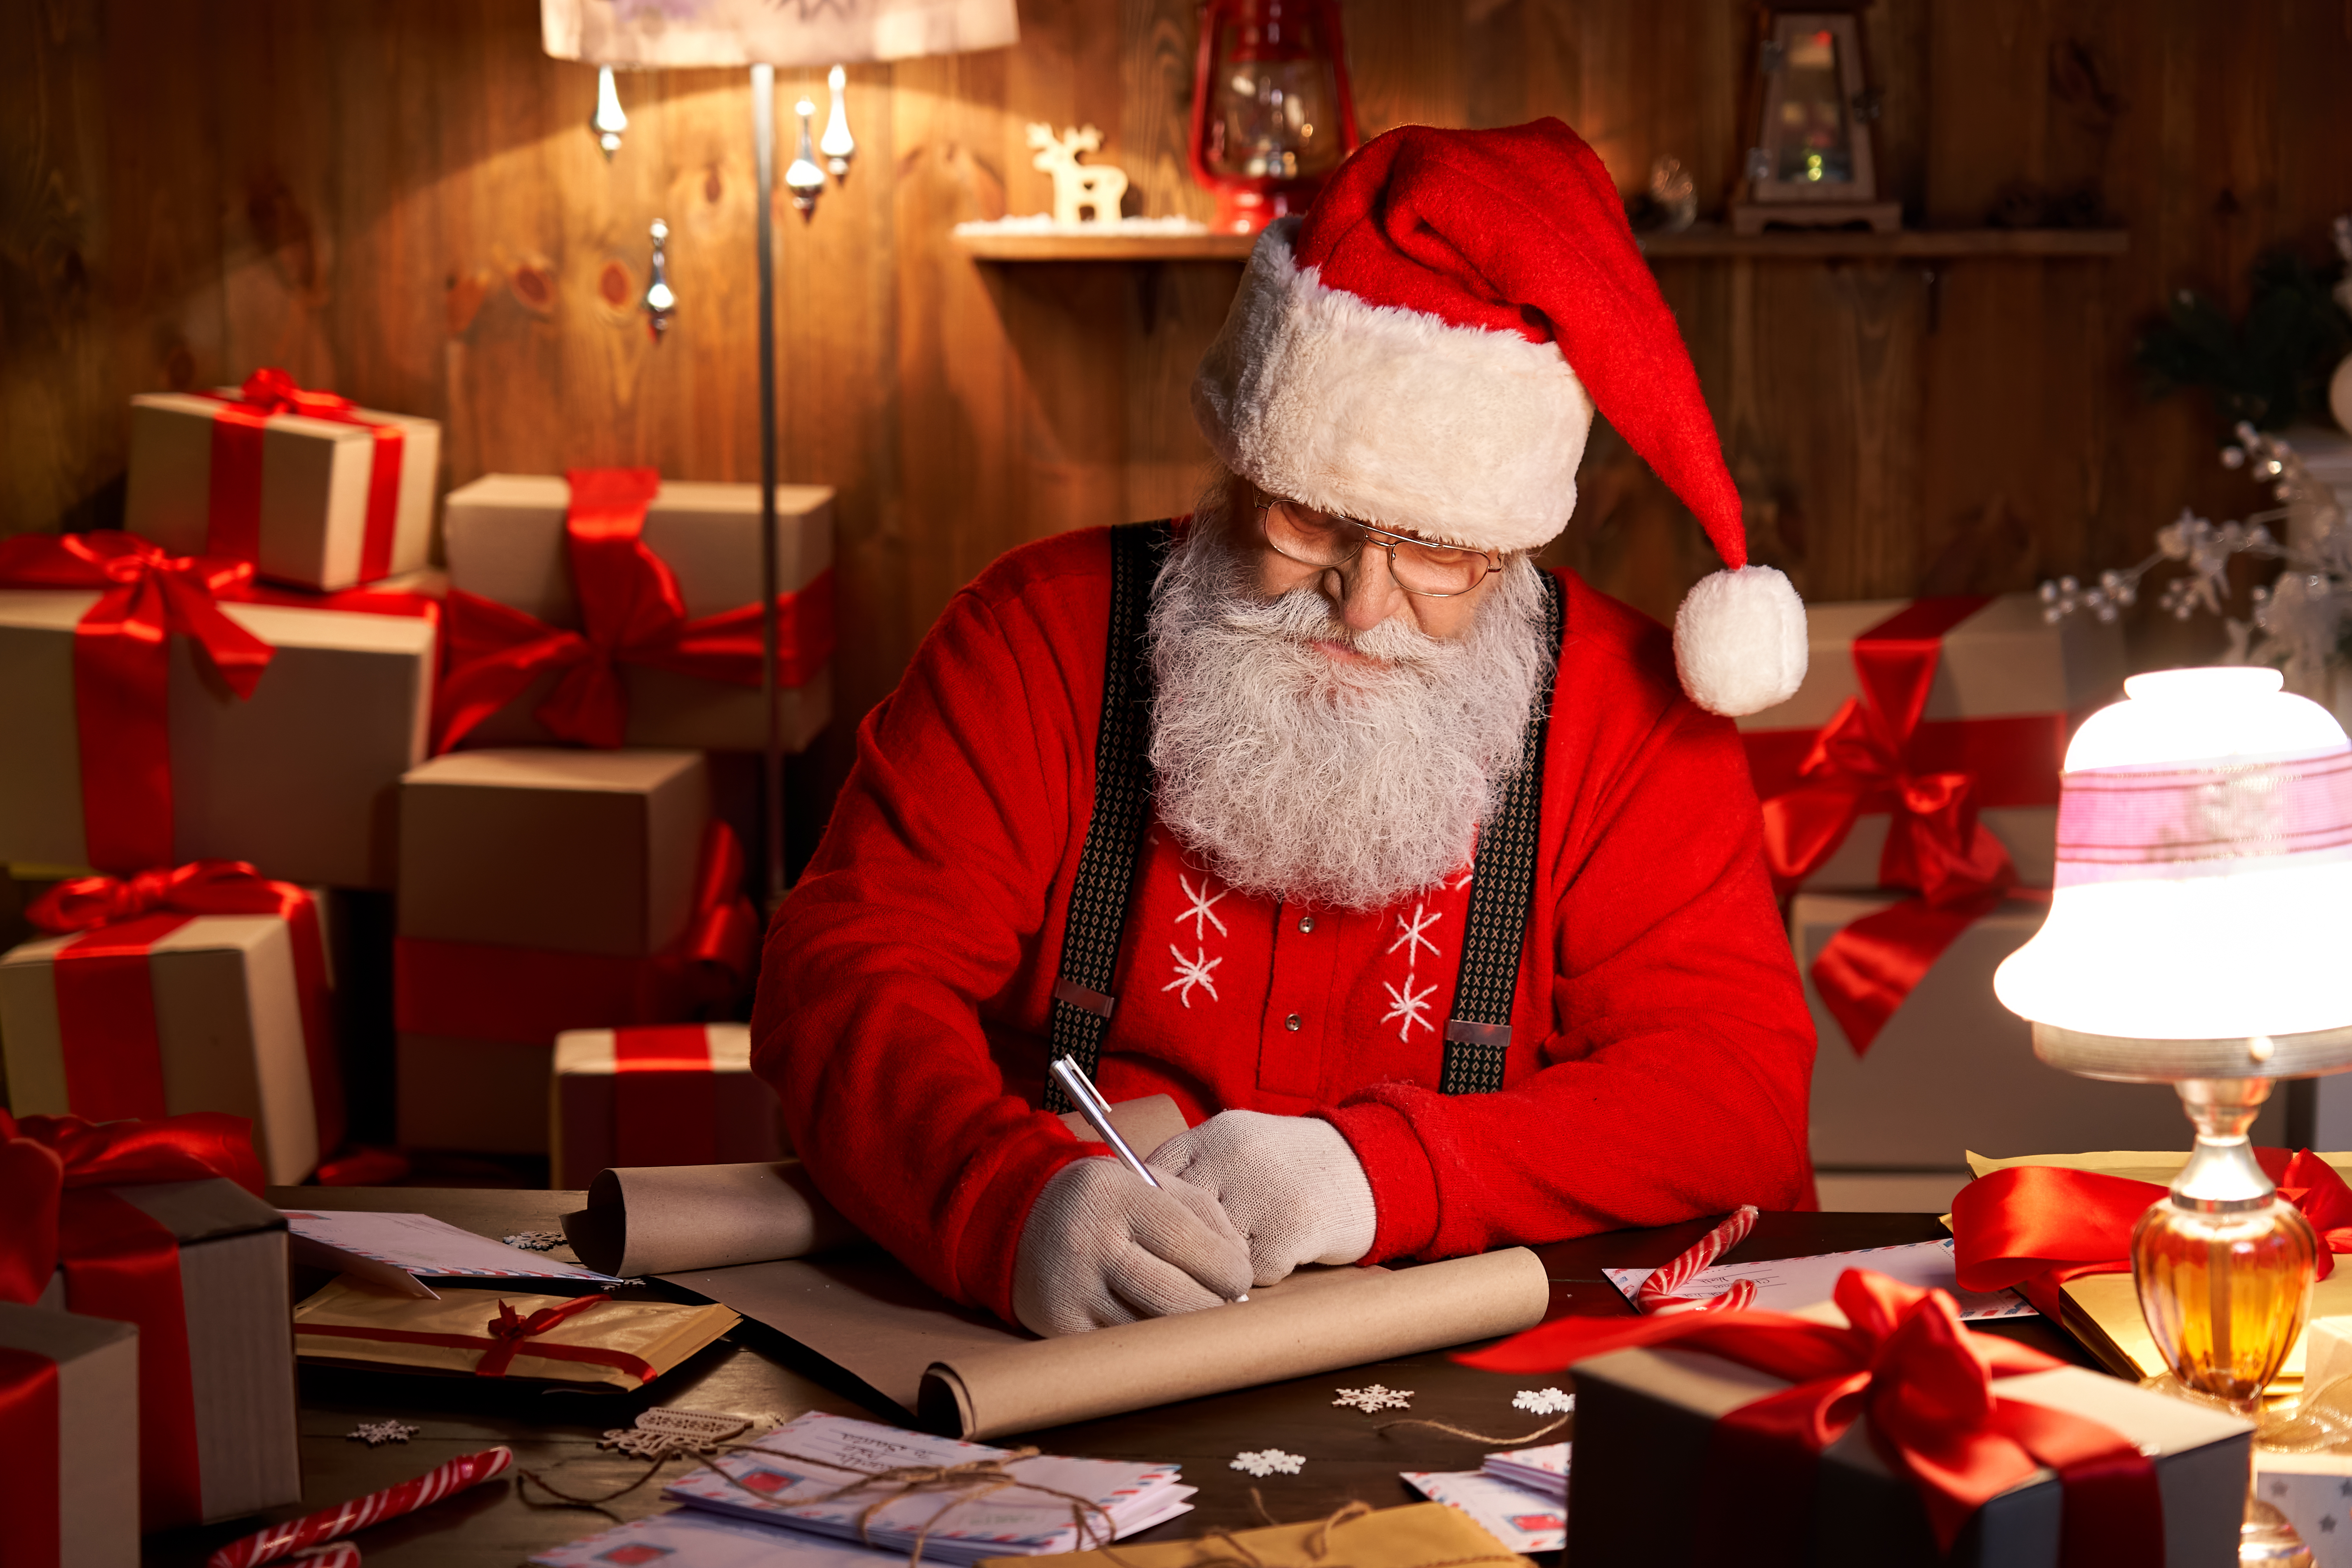 Inside the Grotto: An Analysis of Working Conditions at Santa’s Workshop